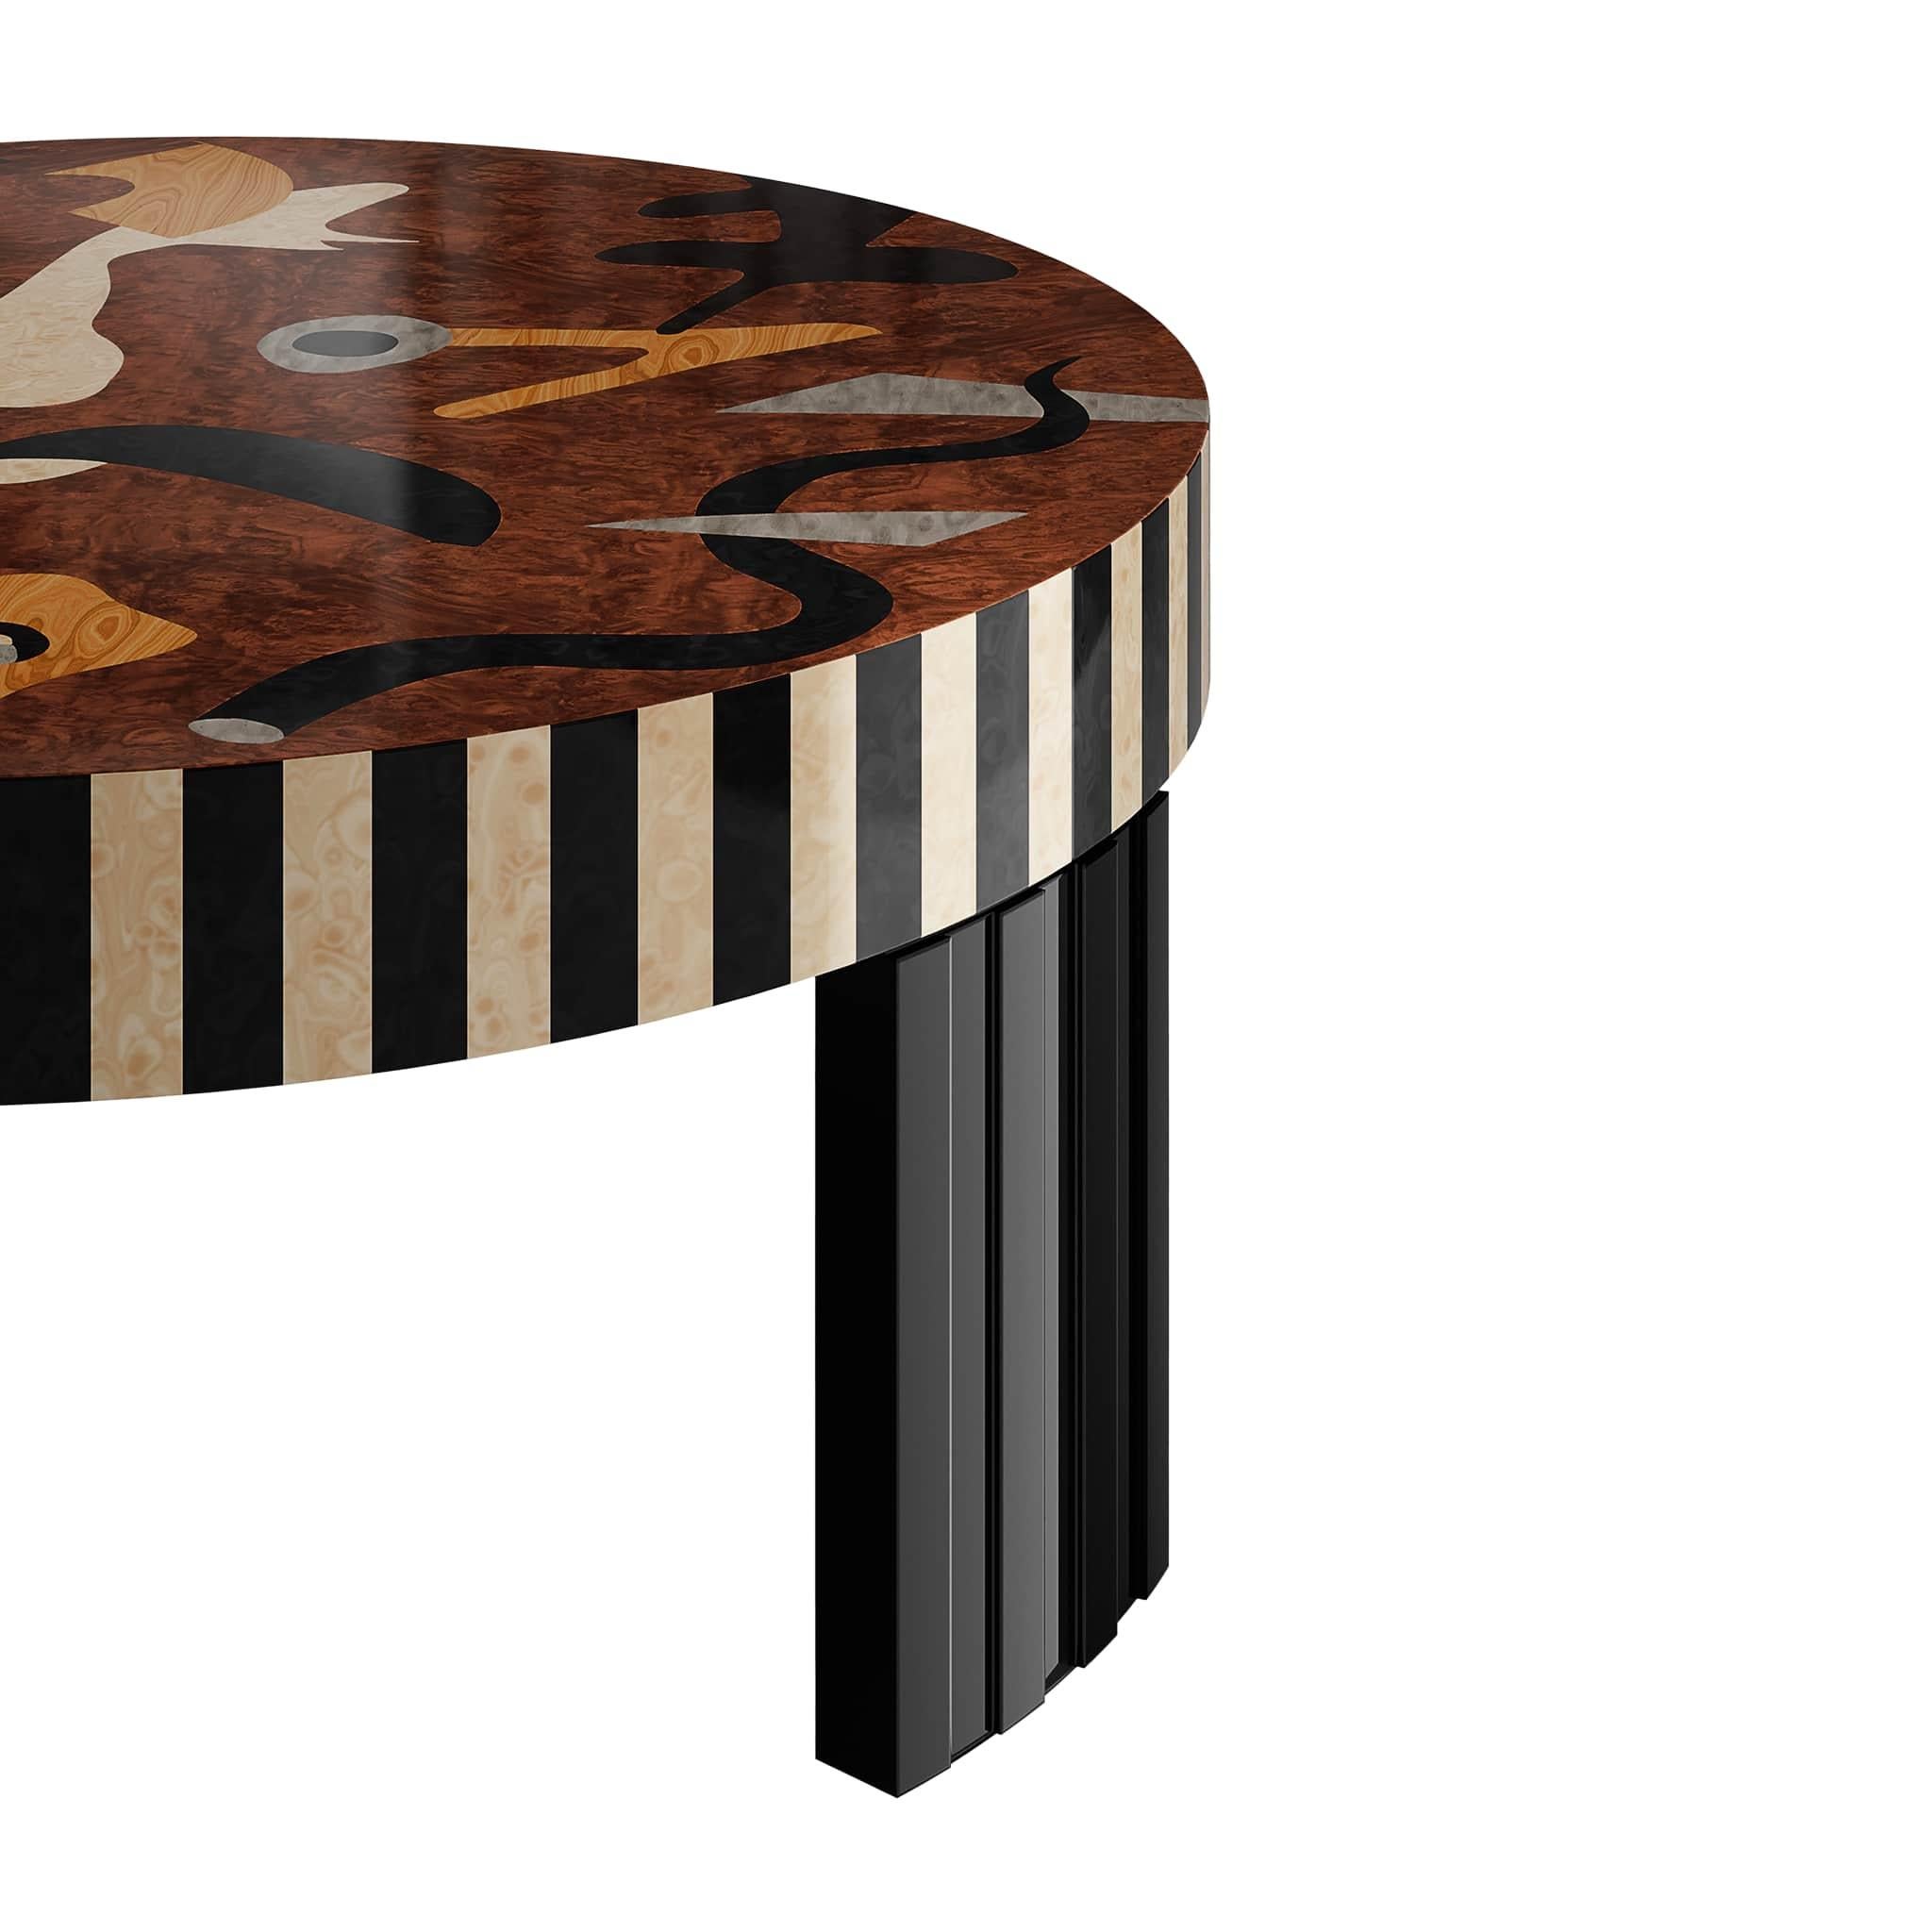 Portuguese Mid-Century Modern Center Coffee Table Abstract Figures Walnut Wood Marquetry For Sale